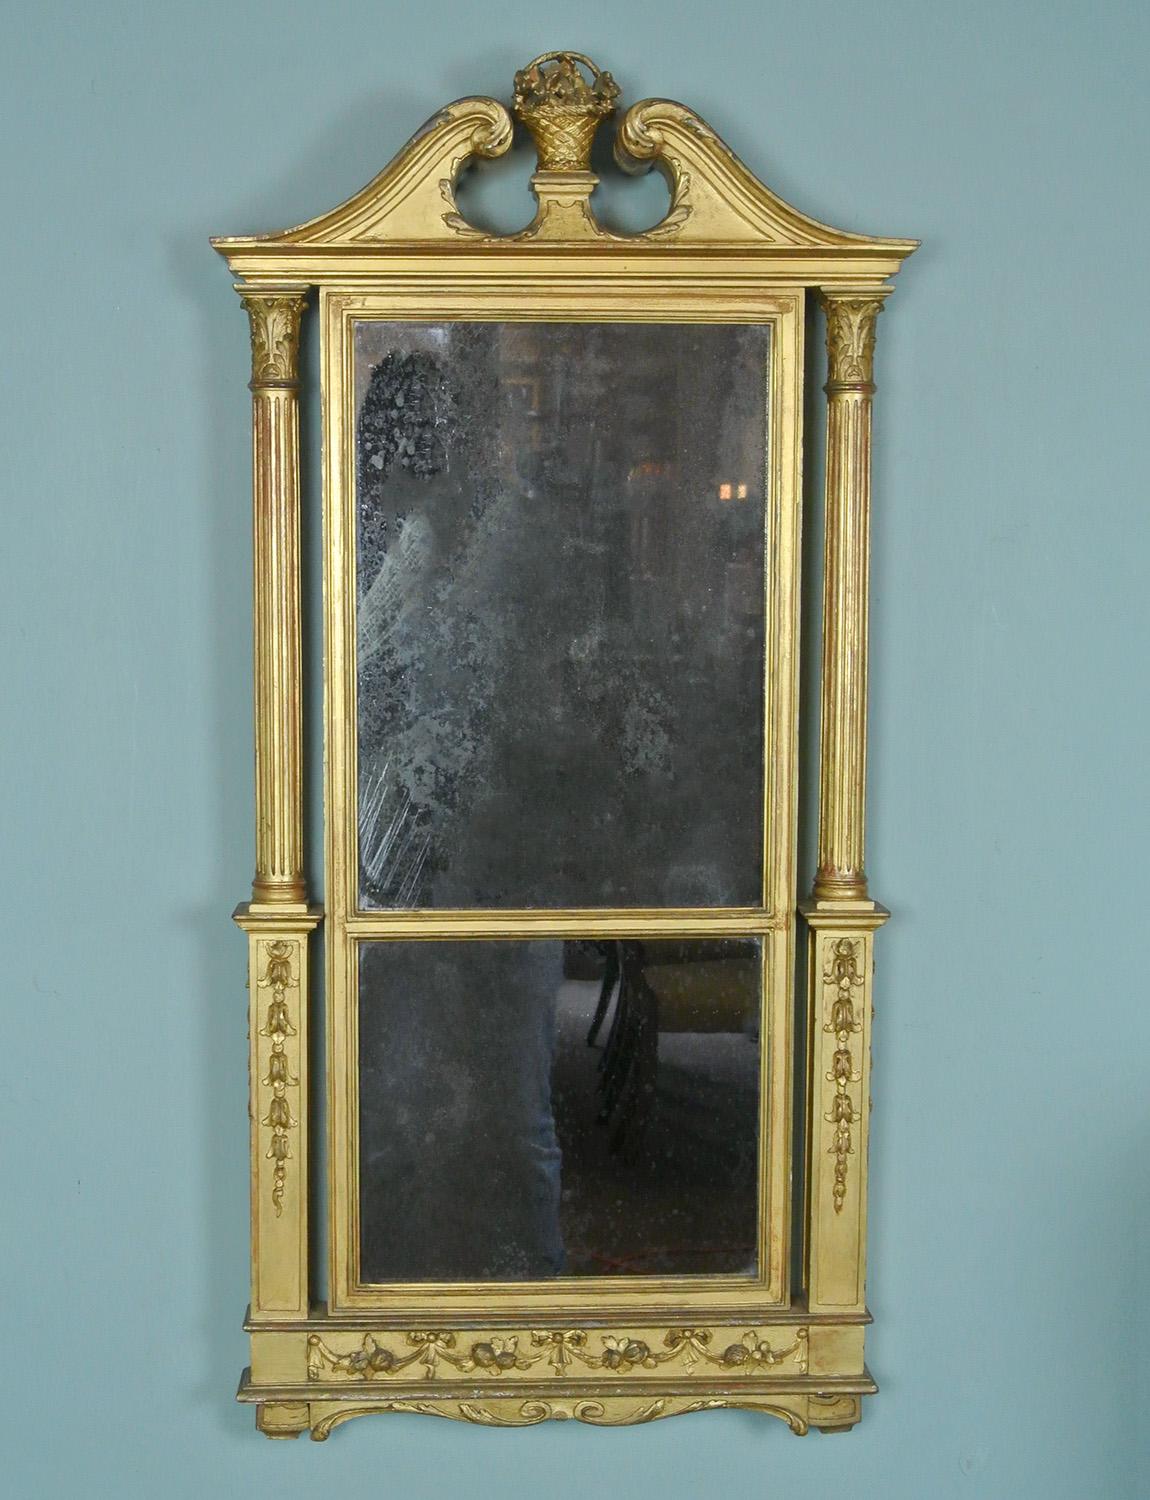 Superb Large George III Giltwood Neoclassical Pier Glass with Original Plate In Good Condition For Sale In Heathfield, GB